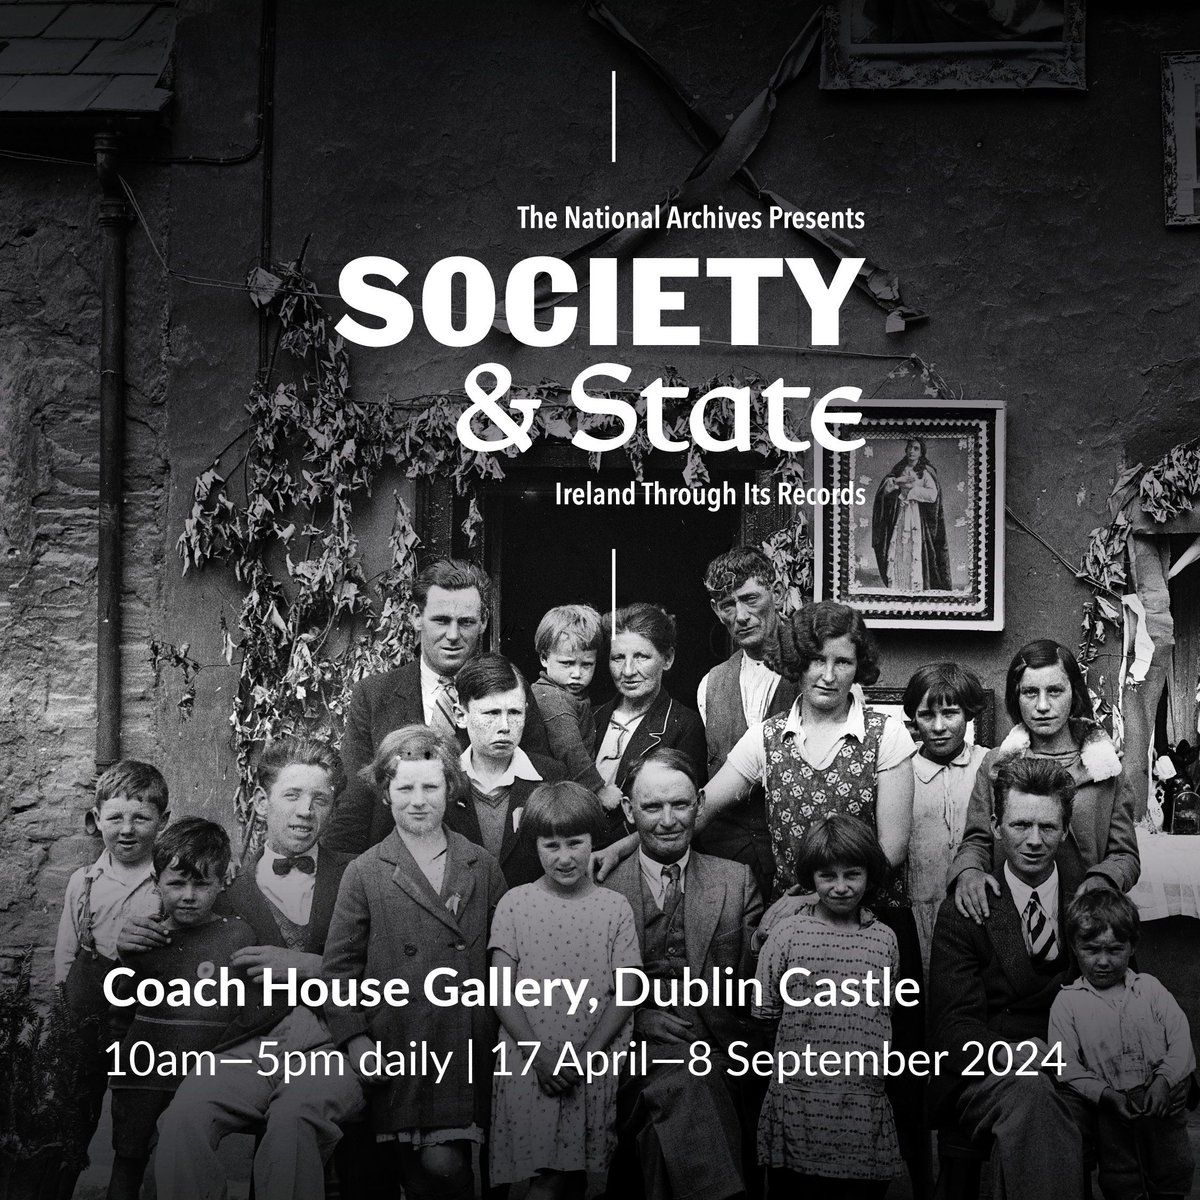 Spring has sprung in Dublin so as we head into the long weekend, why not take a trip back in time to life in Ireland from the 1920s to the 1990s and visit our exhibition 'Society & State - Ireland Through Its Records' in the Coach House Gallery @dublincastleOPW? @DeptCultureIRL